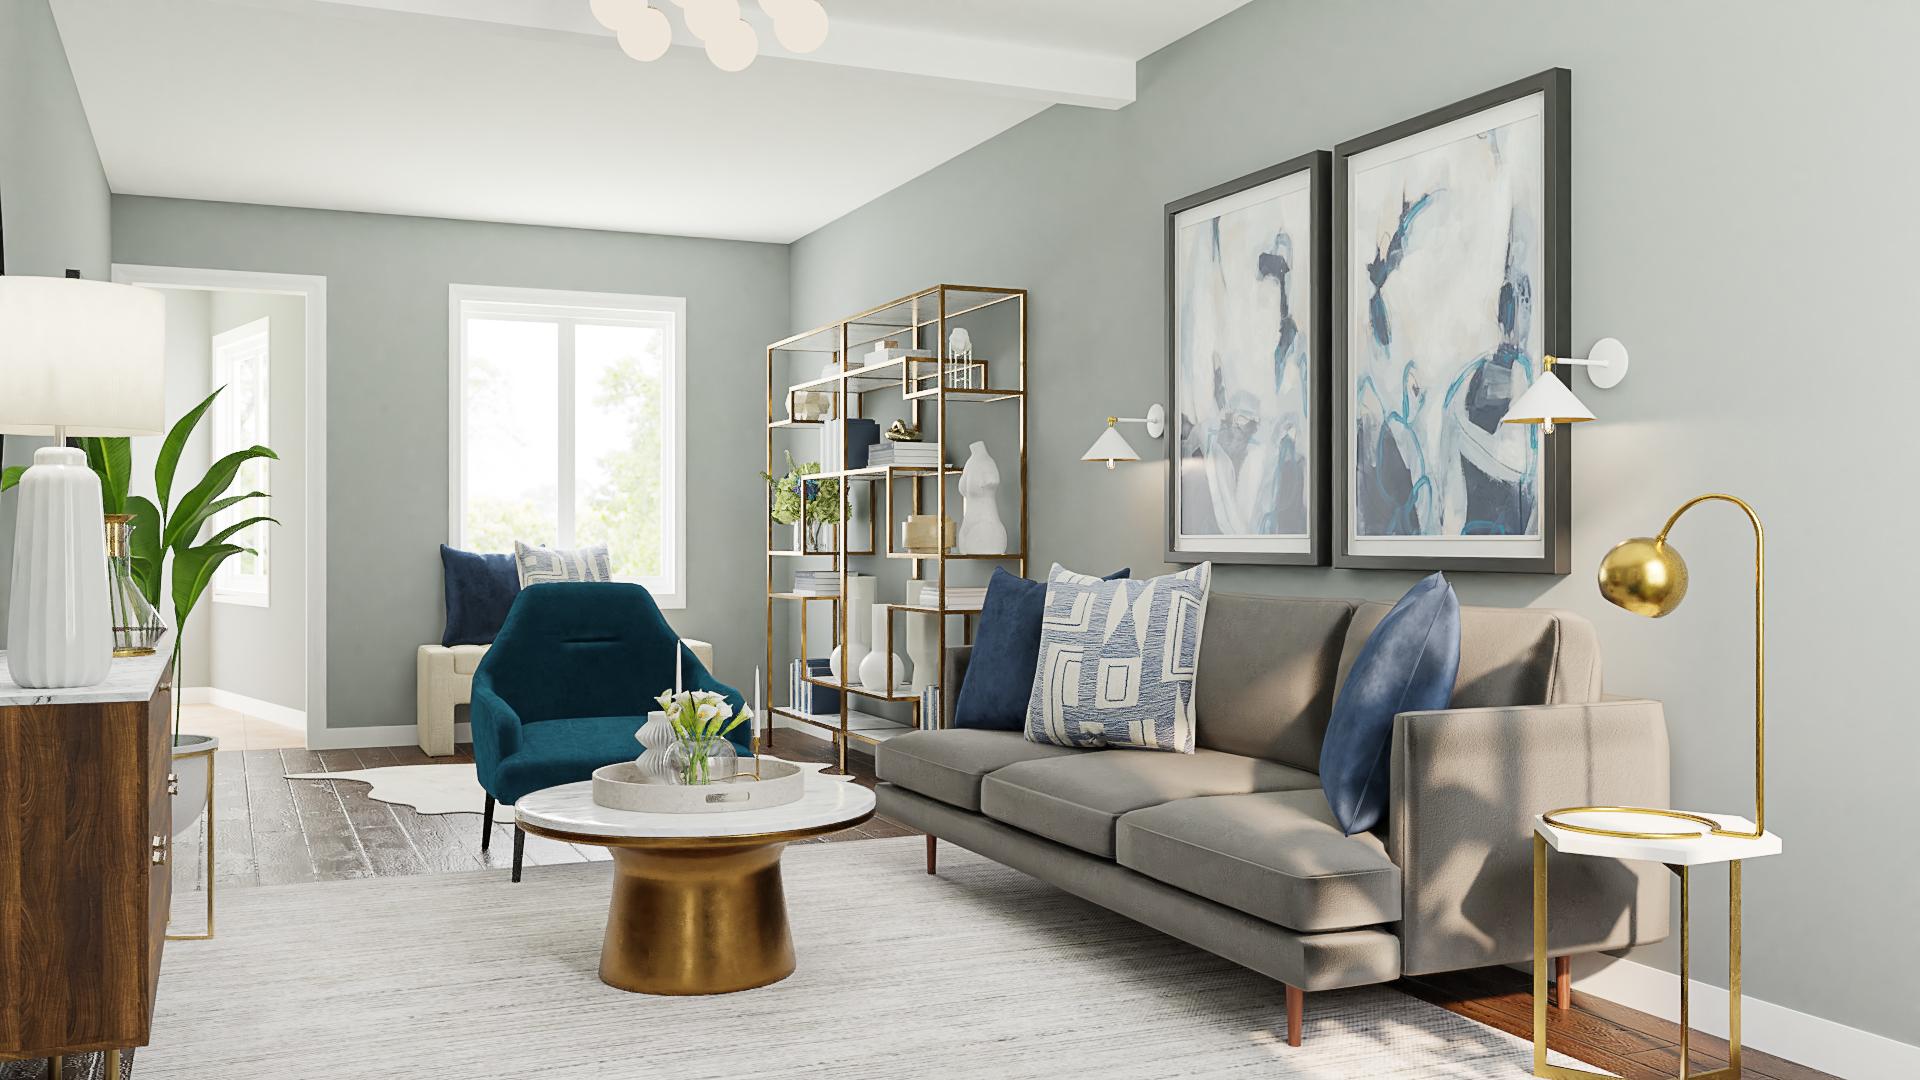 Glam Rectangle Living Room With Brass Accents